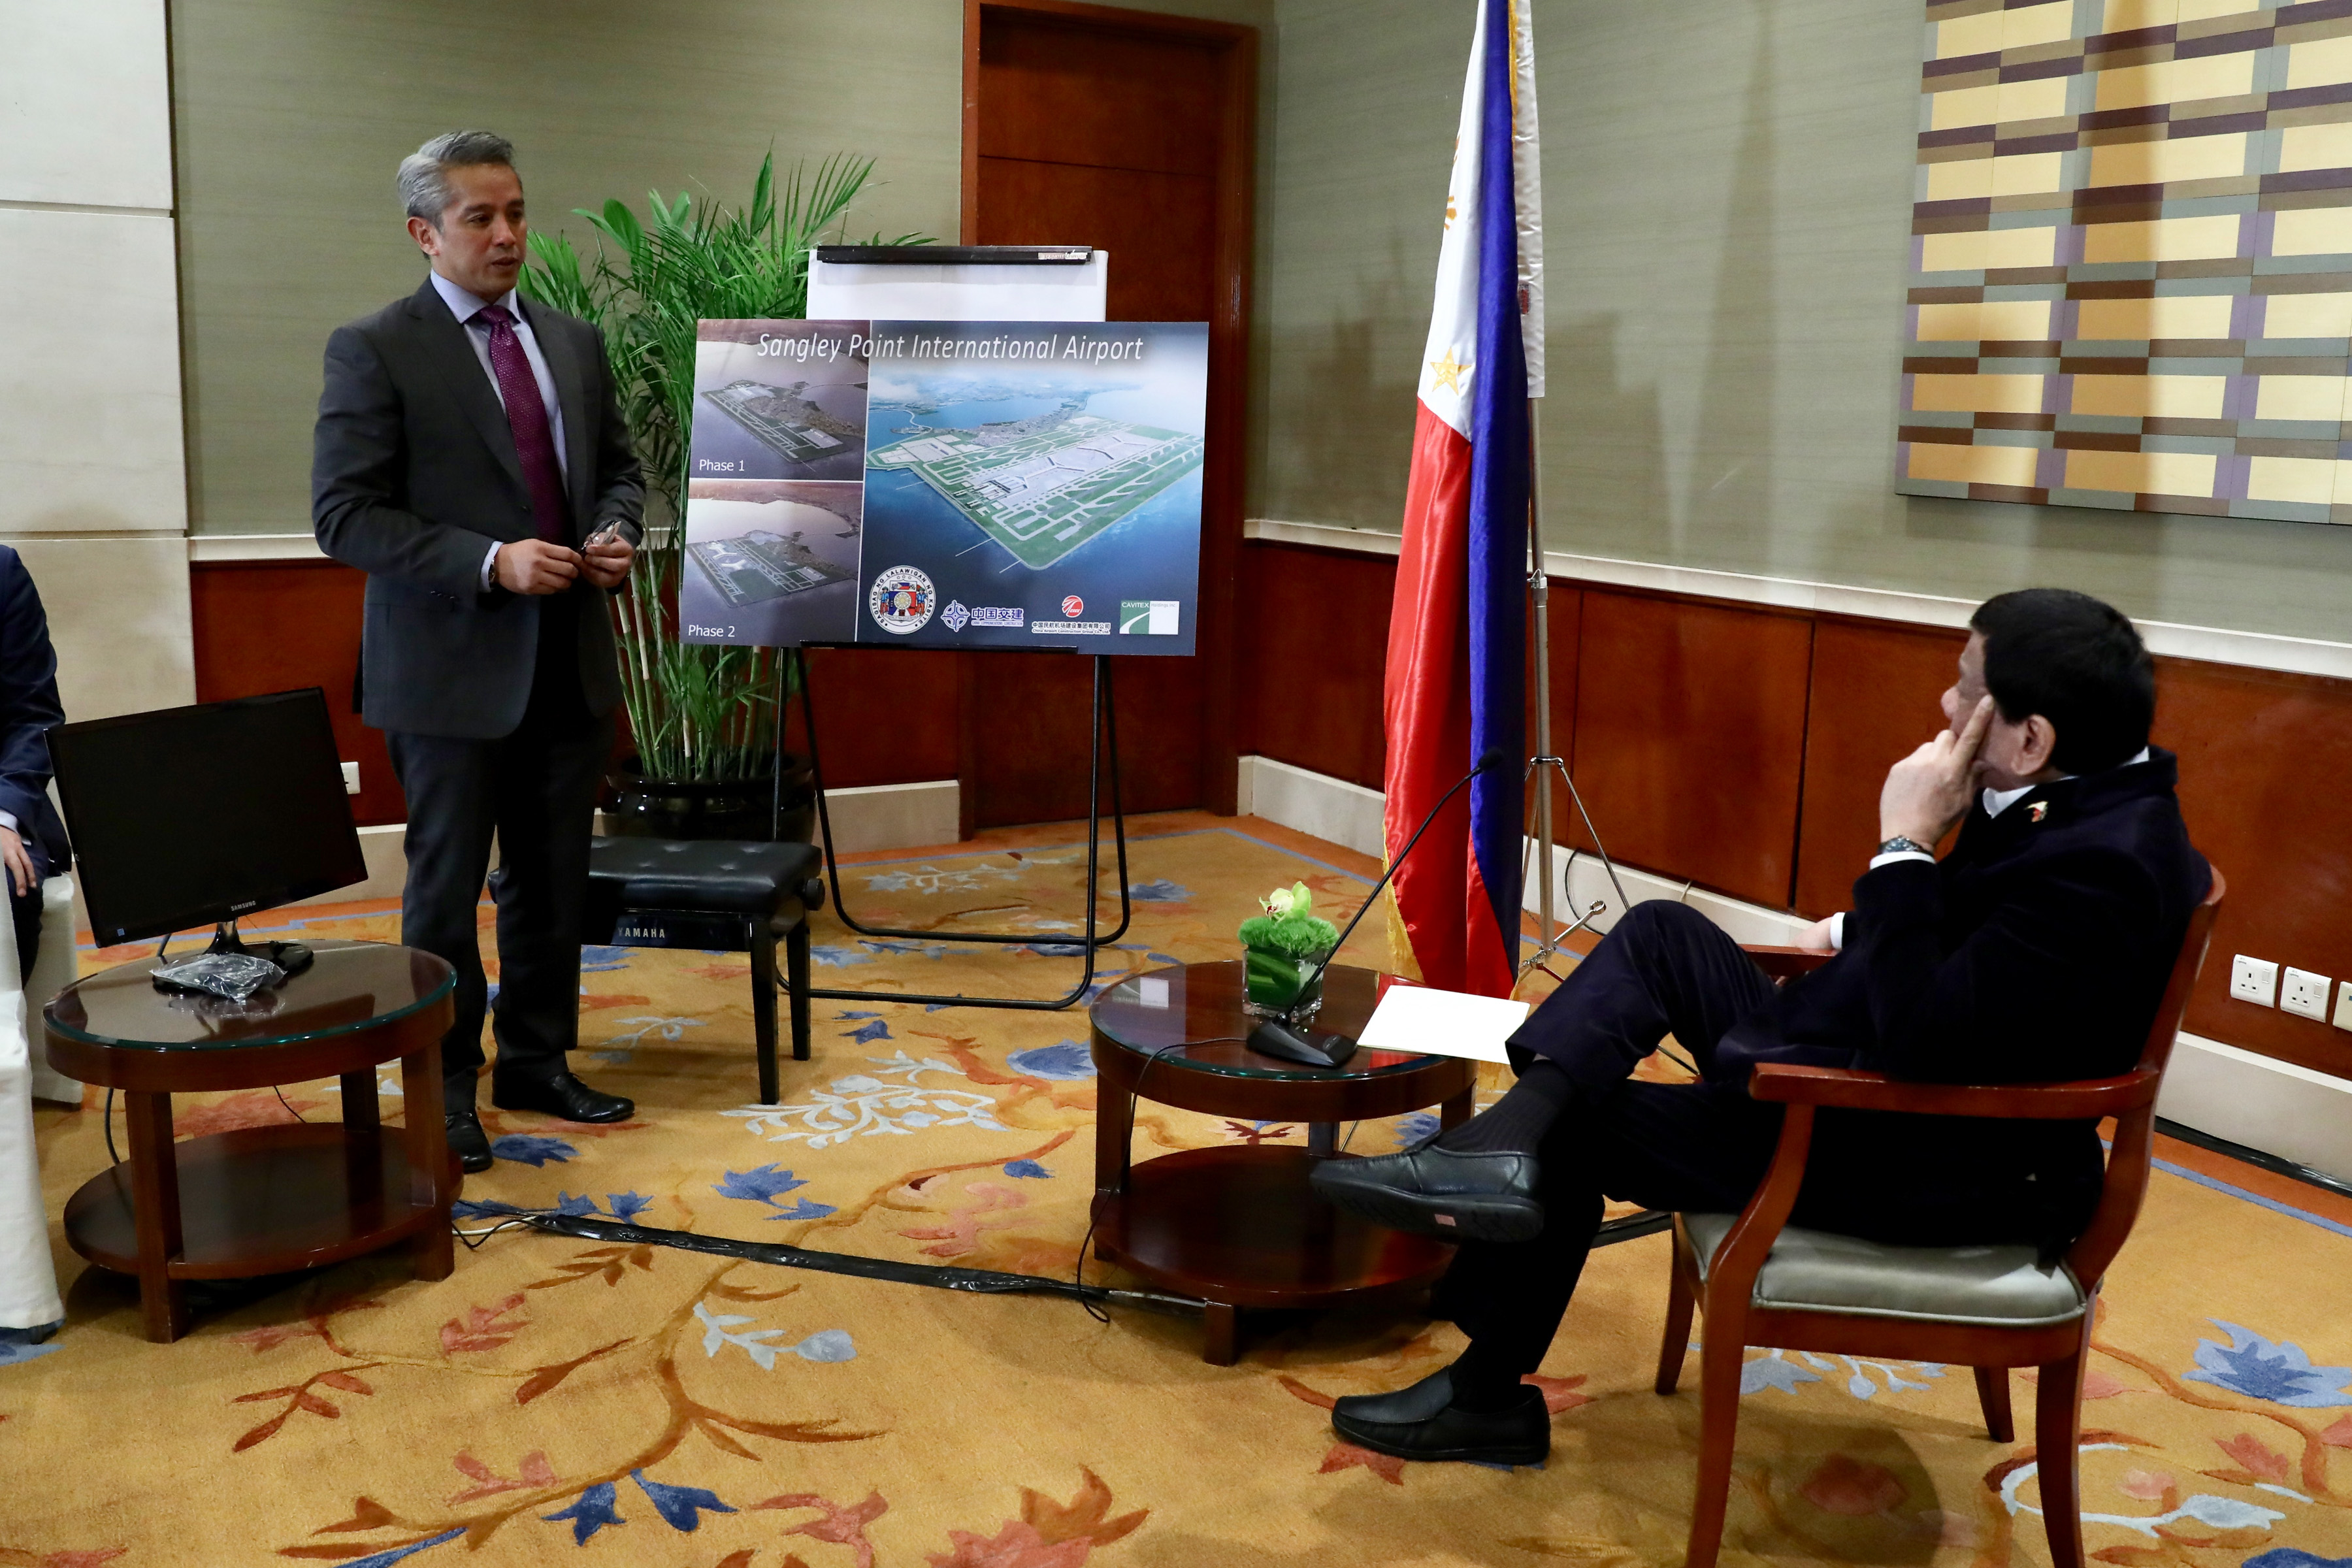 CAVITE'S PITCH. President Rodrigo Duterte looks on as Cavite Governor Juanito Victor Remulla Jr presents the architect's perspective of the Sangley Point International Airport during the courtesy call on the President at the Grand Hyatt Hotel in Beijing on August 30, 2019. Malacañang Photo 